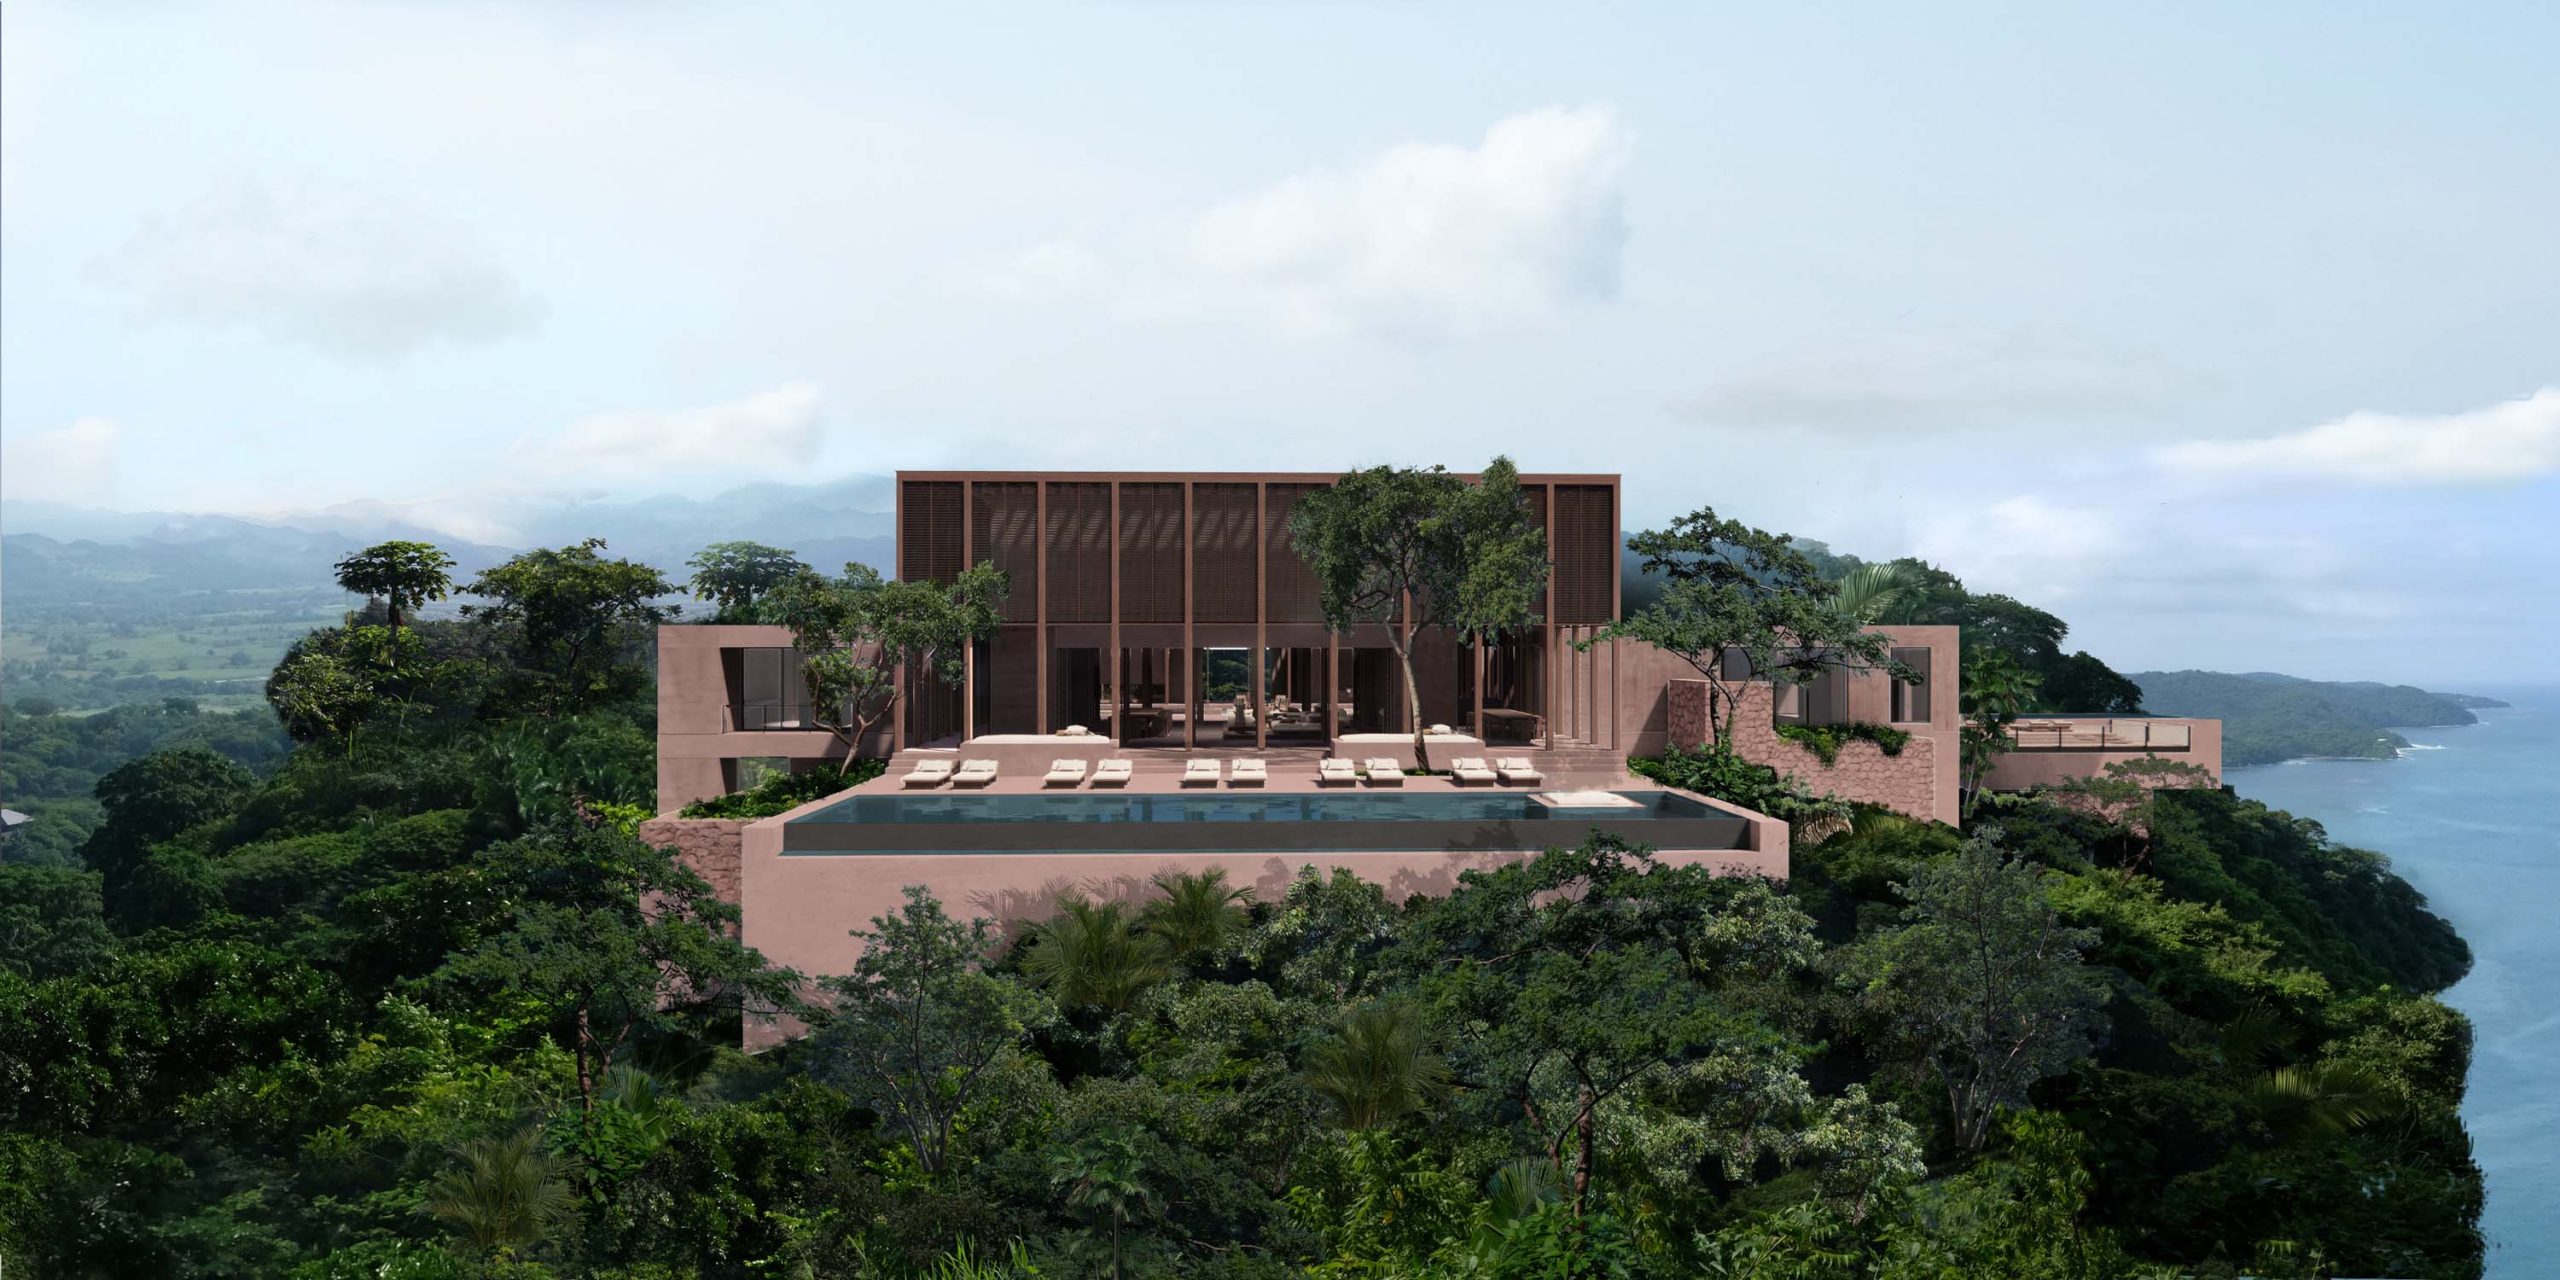 Never Before Listed, One&Only Mandarina Resort Property to Auction via Concierge Auctions